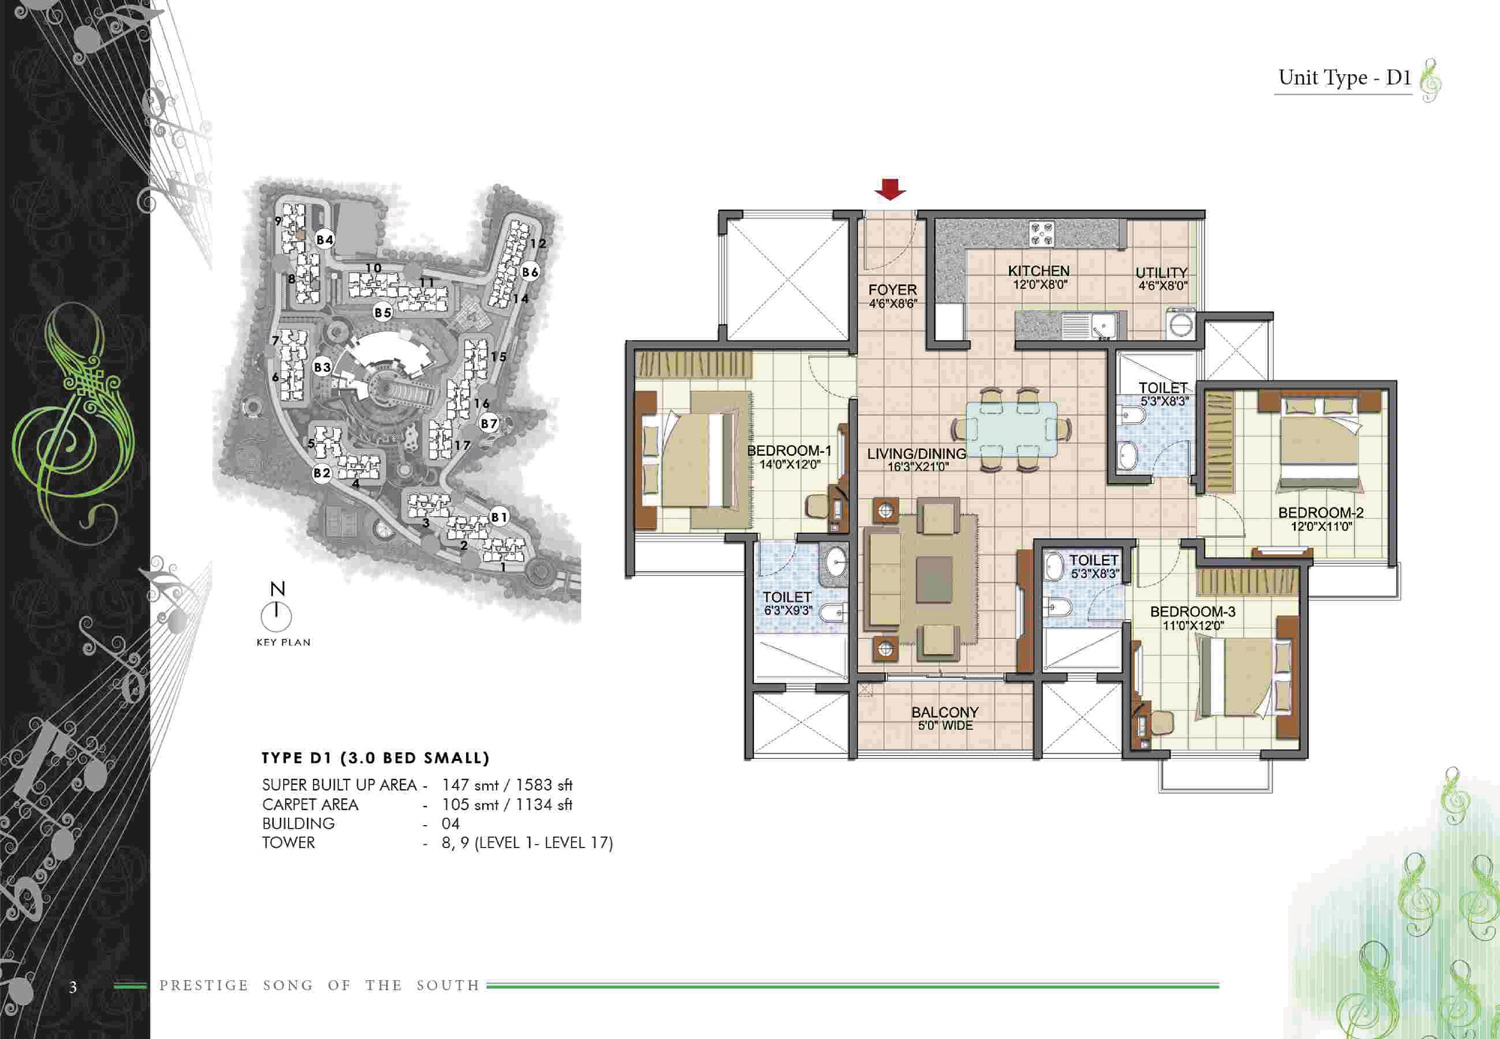 Prestige Song of the South Phase 2 Floor Plan